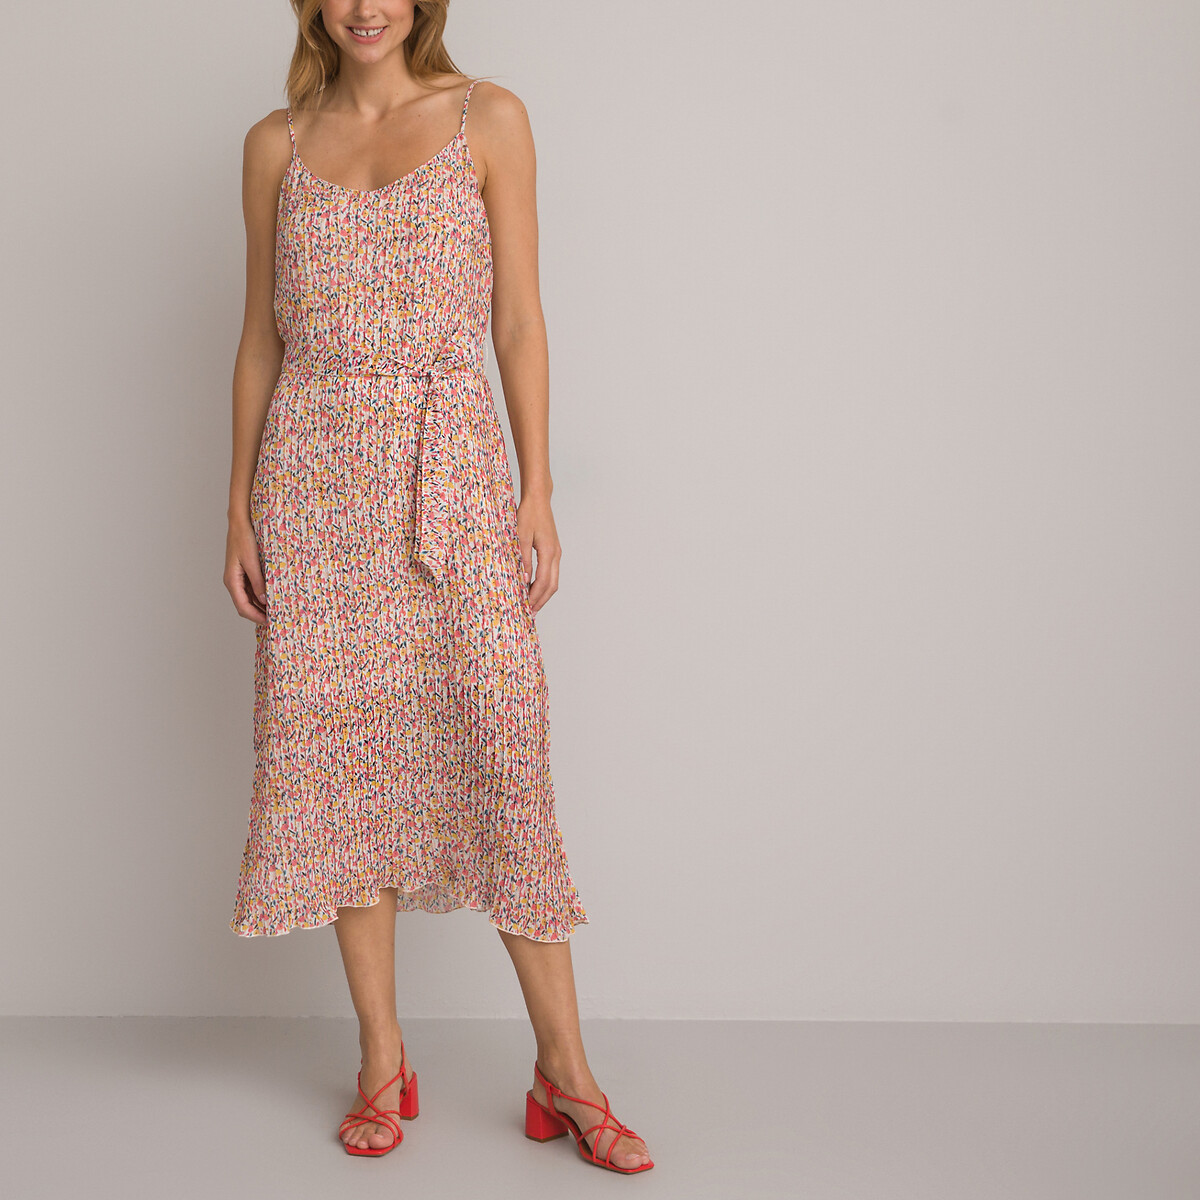 Floral Print Pleated Dress with Shoestring Straps